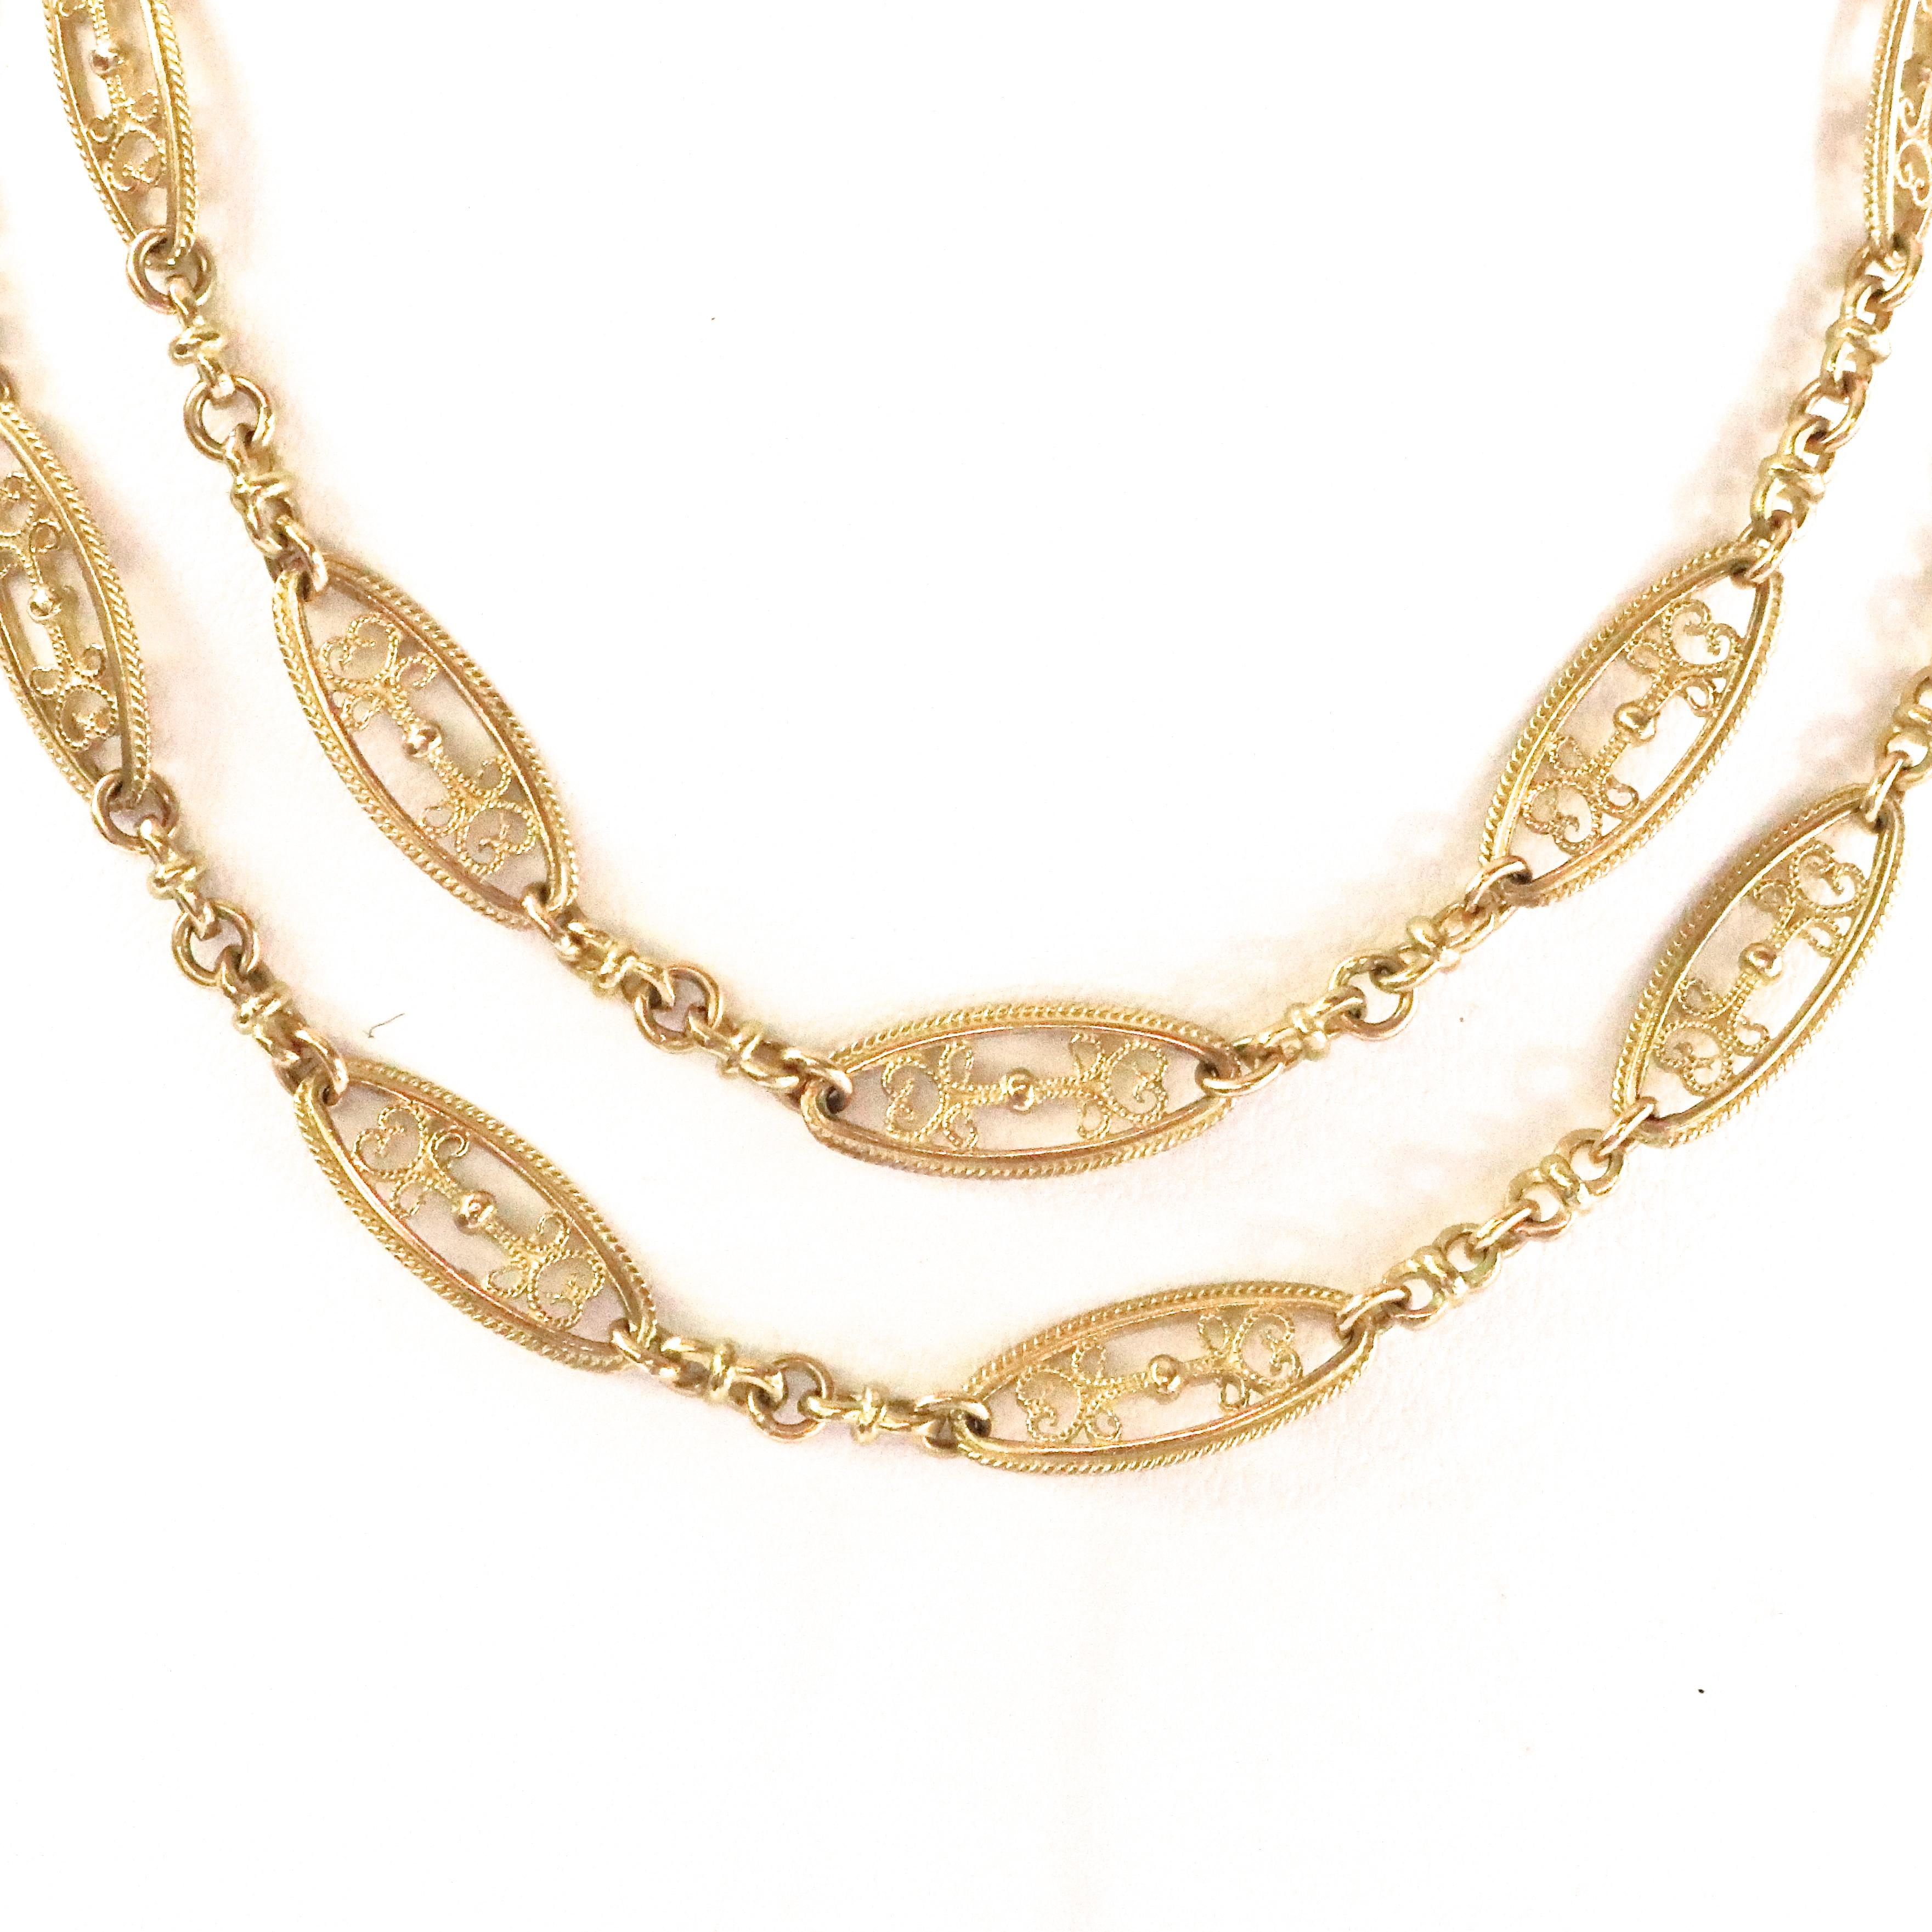 Antique French 18k yellow gold chain. 25 inches long. 31.4 grams. Circa 1800s. With French eagle head hallmark.
Our 1stdibs Recognized Dealer/Platinum Seller Guarantees: 
7 day return policy for full cash refund
30 day return for store credit 
Free